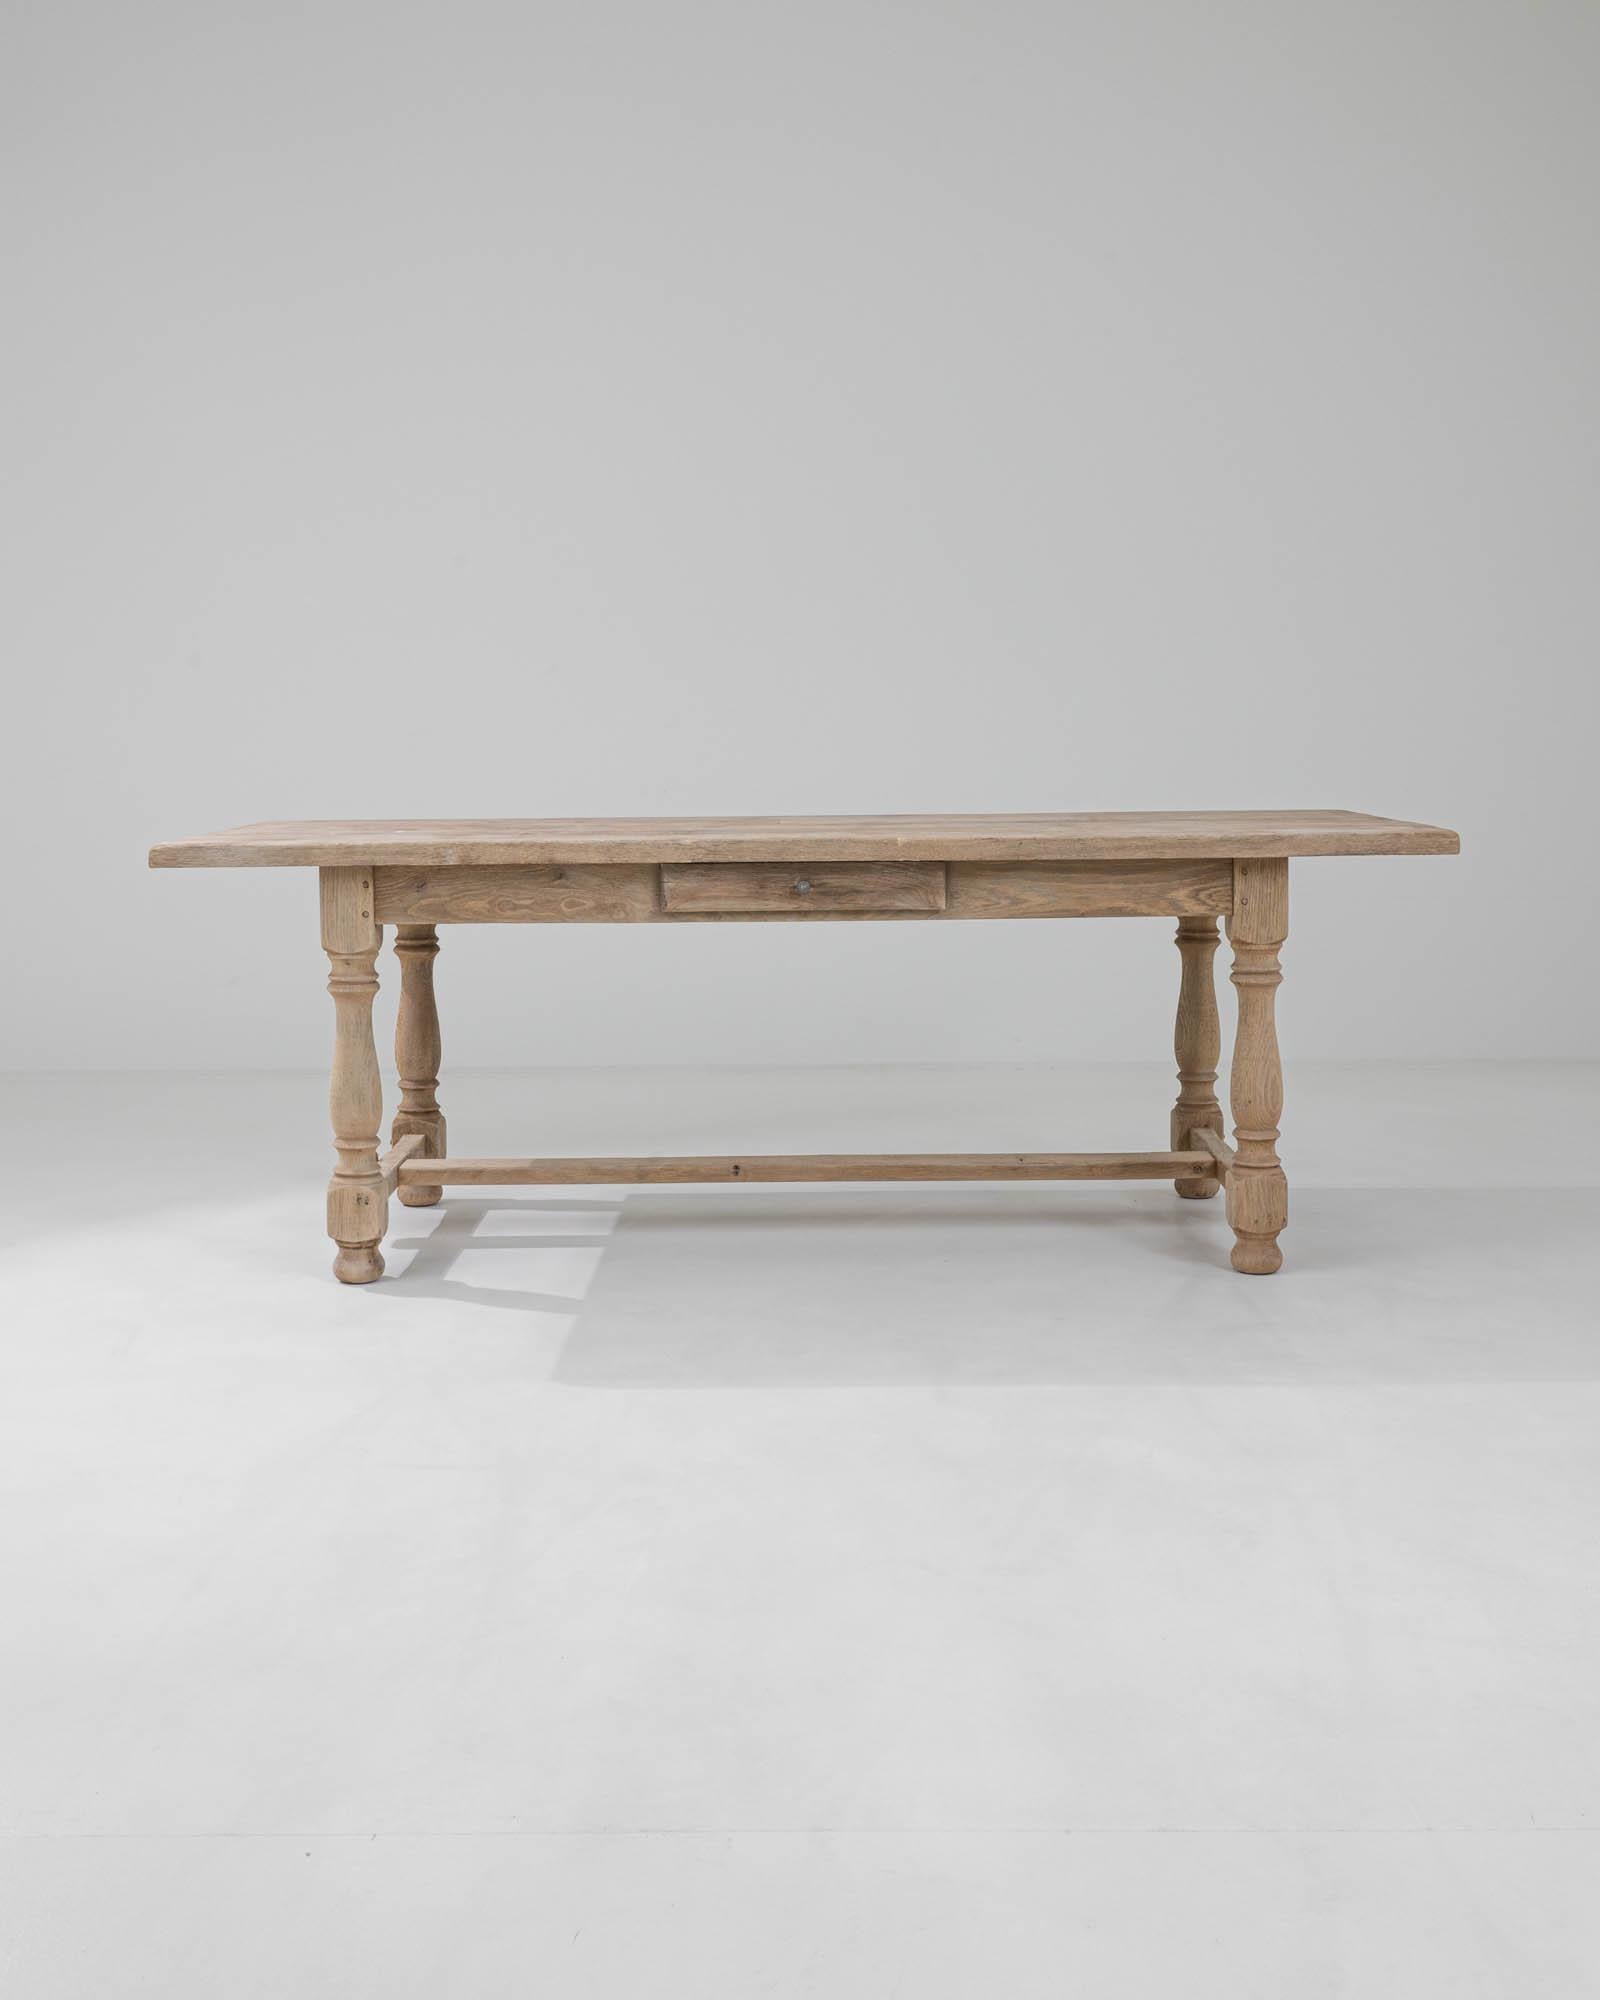 A simple country design in natural oak gives this vintage dining table a timeless charm. Hand-built in Belgium in the 20th century, the pinned tennon stretcher announces the quality construction, while the turned legs brings elegance to the